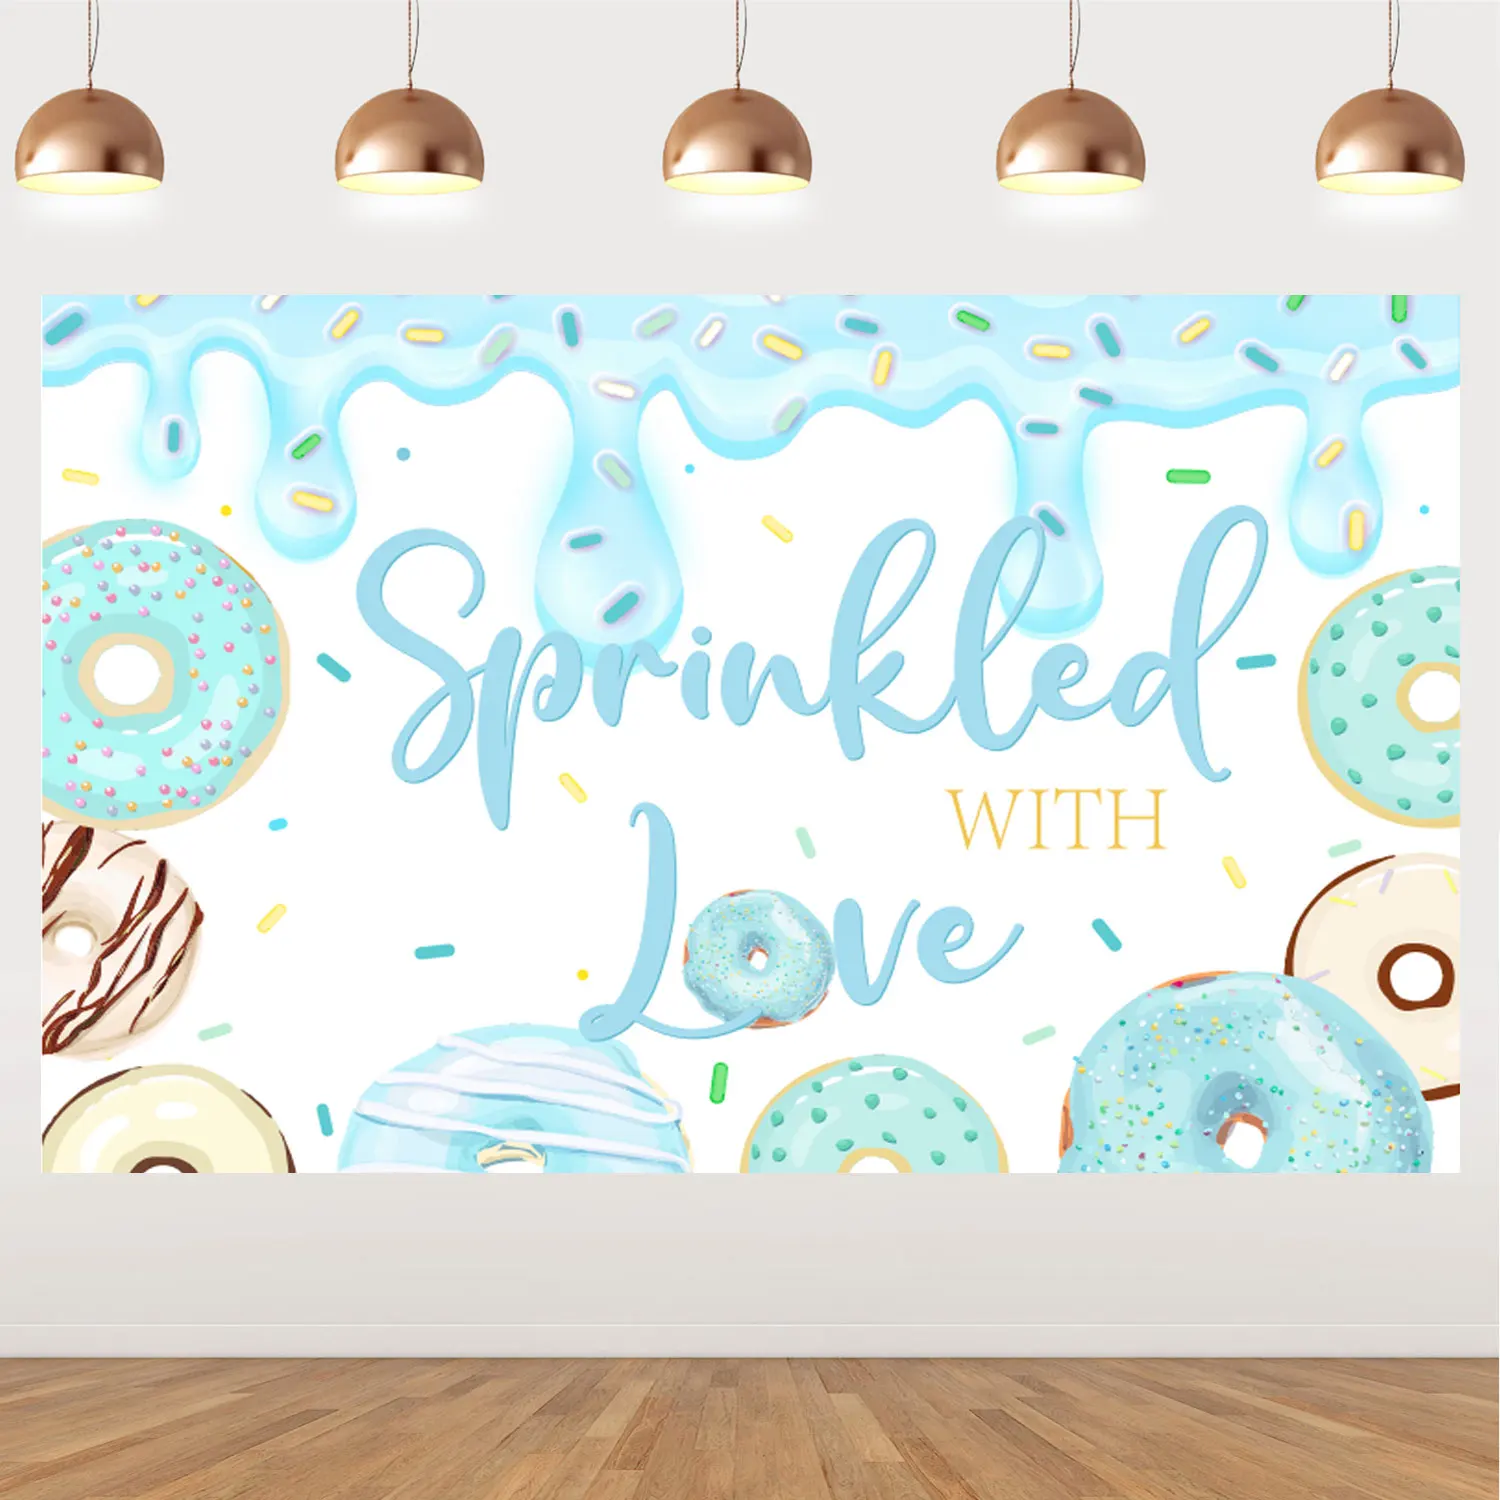 

Donut Theme Party Decoration Blue Sprinkled with Love Donut Backdrop Banner for Boy Girl Birthday Baby Shower Photo Booth Props